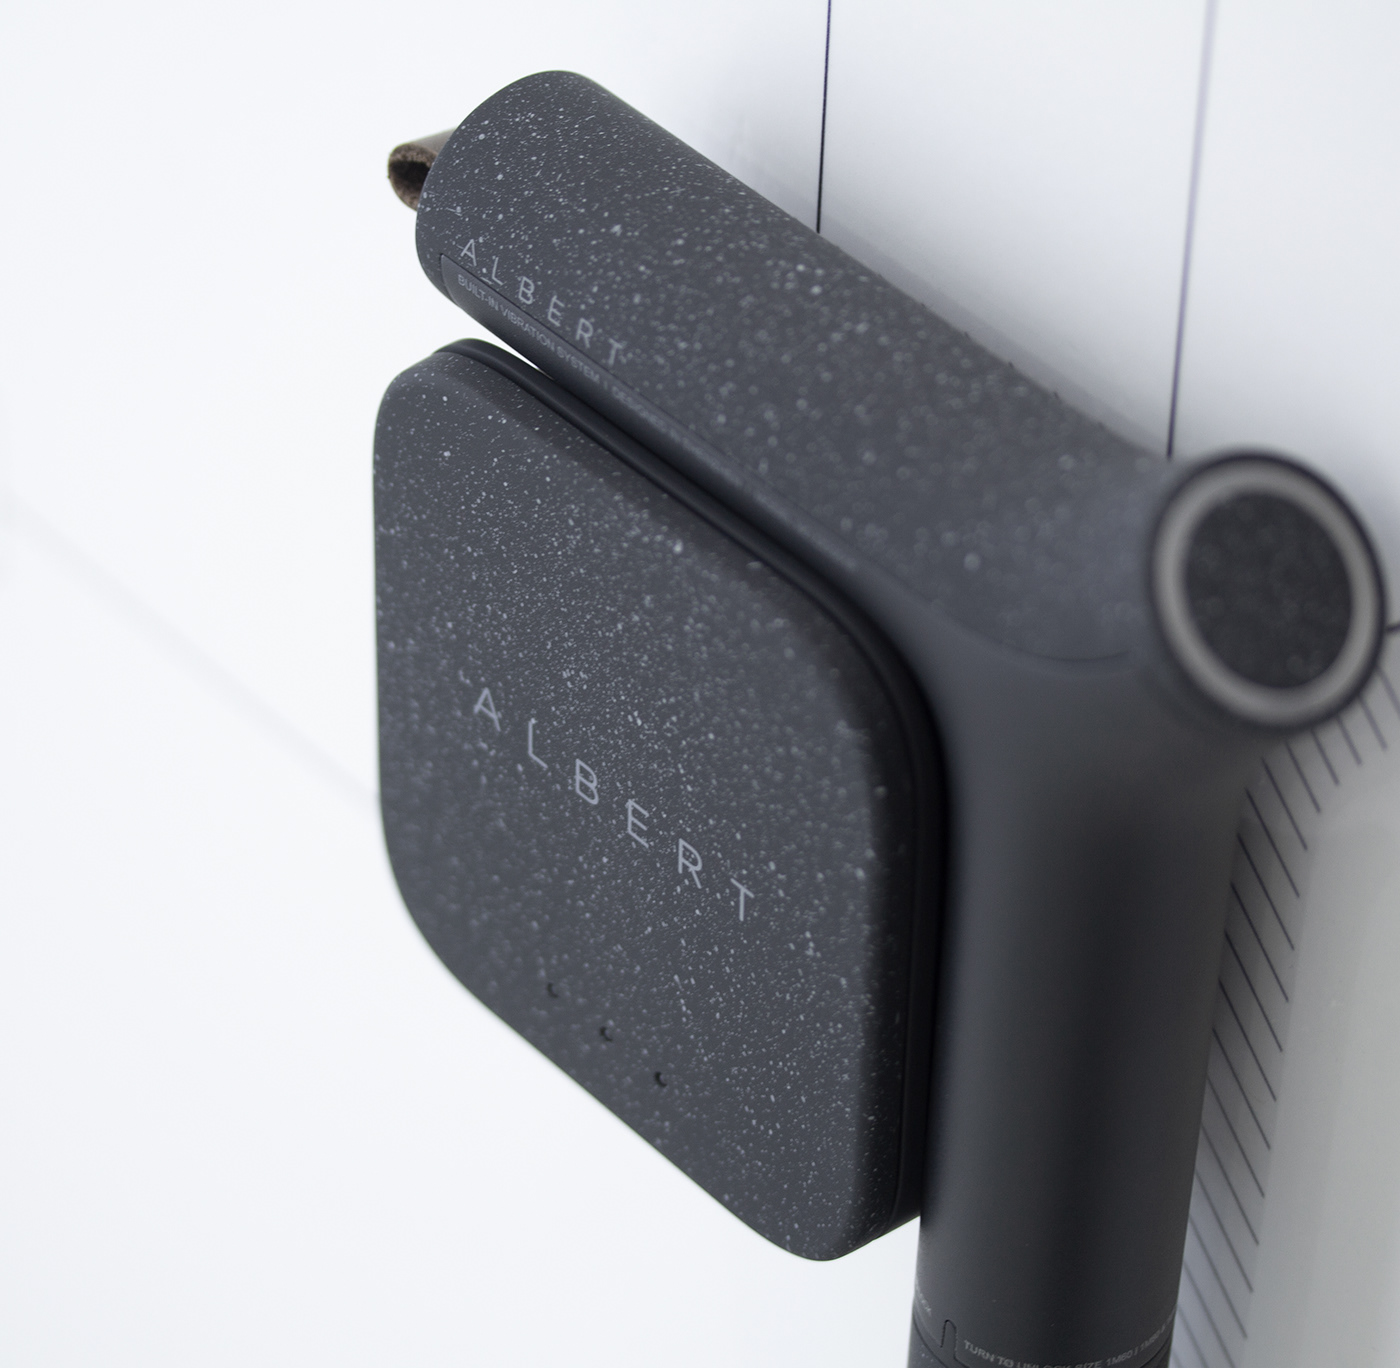 The grip of the Albert Cane locked into the cane's wireless charging base.